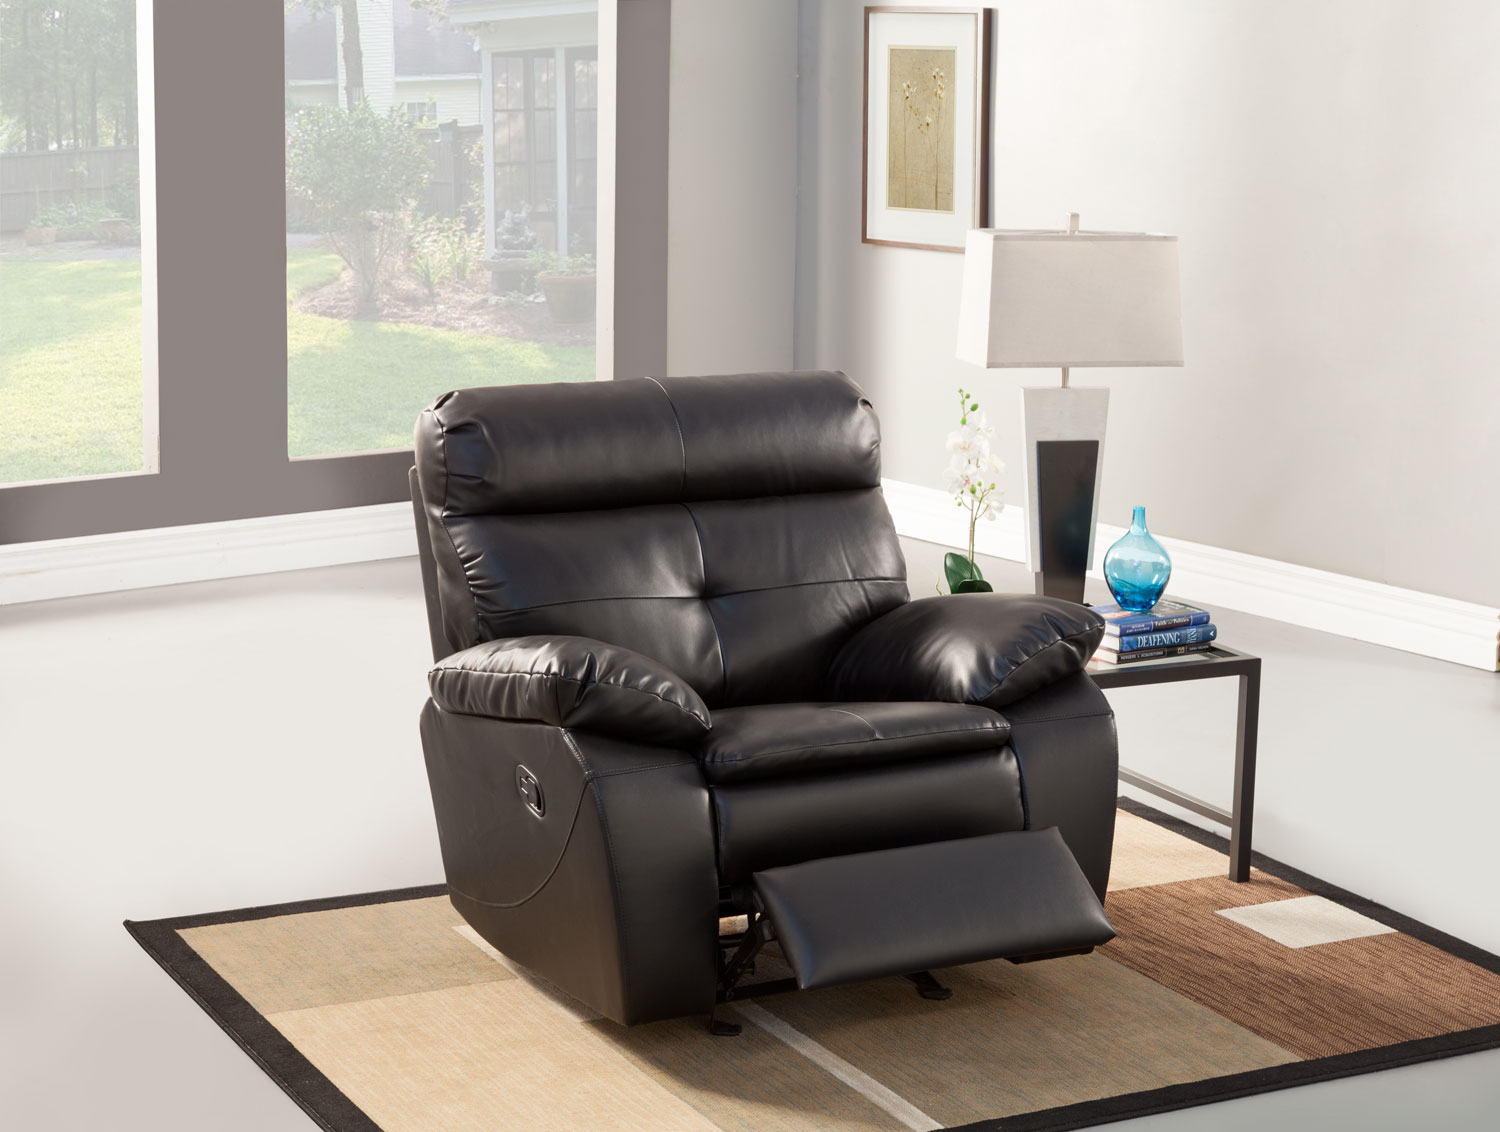 Homelegance Wallace Glider Recliner Chair - Black - Bonded Leather Match